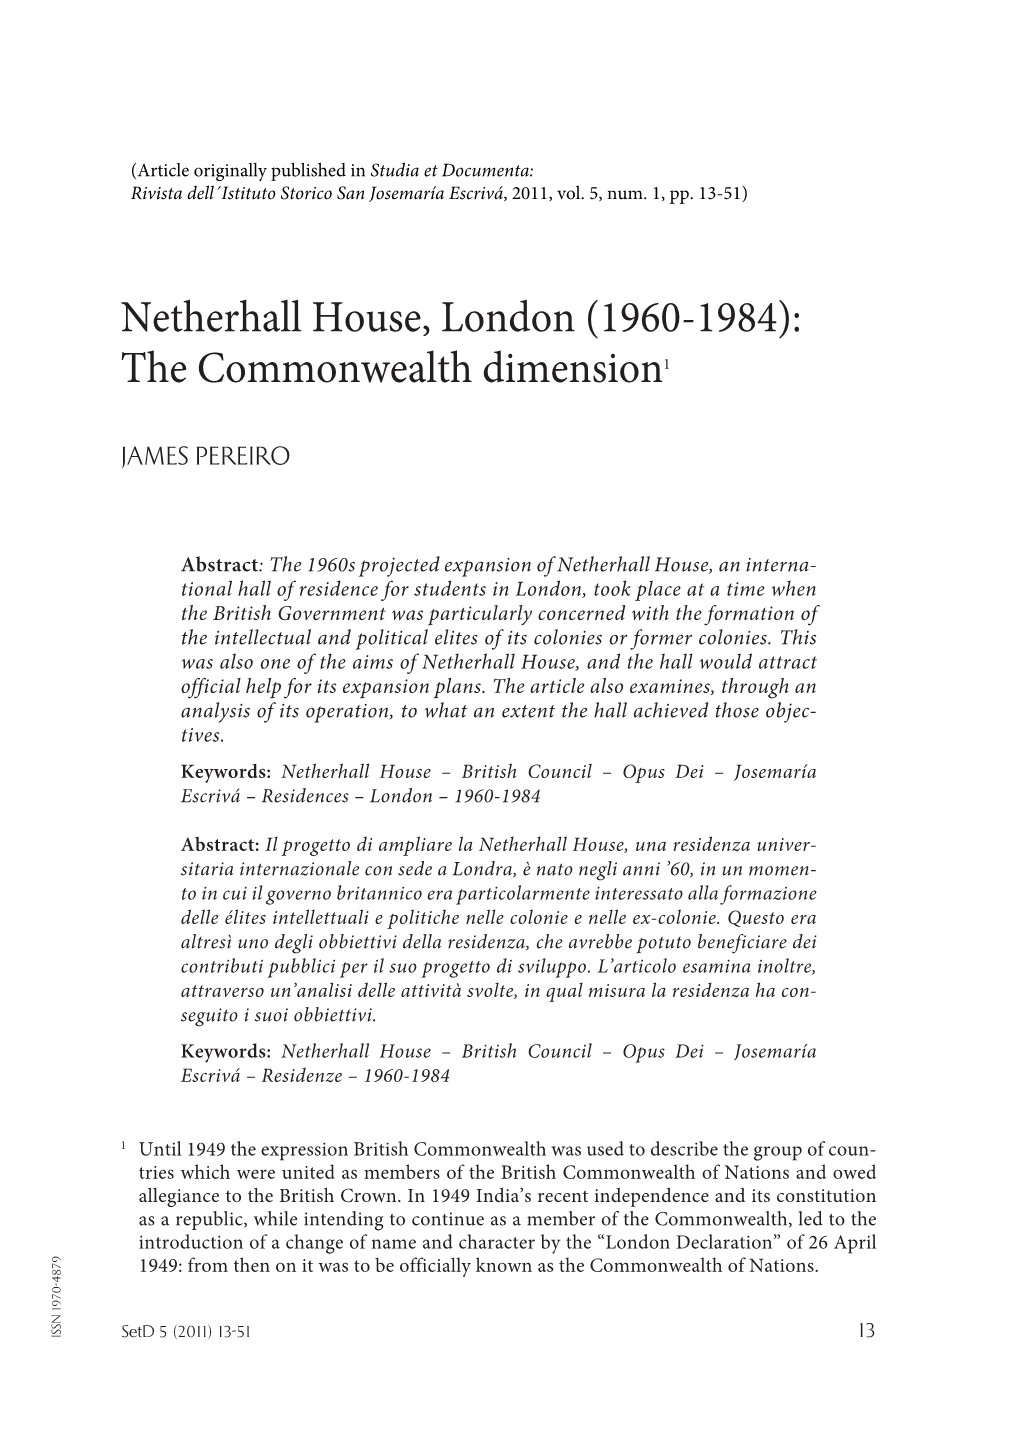 Netherhall House, London (1960-1984): the Commonwealth Dimension1